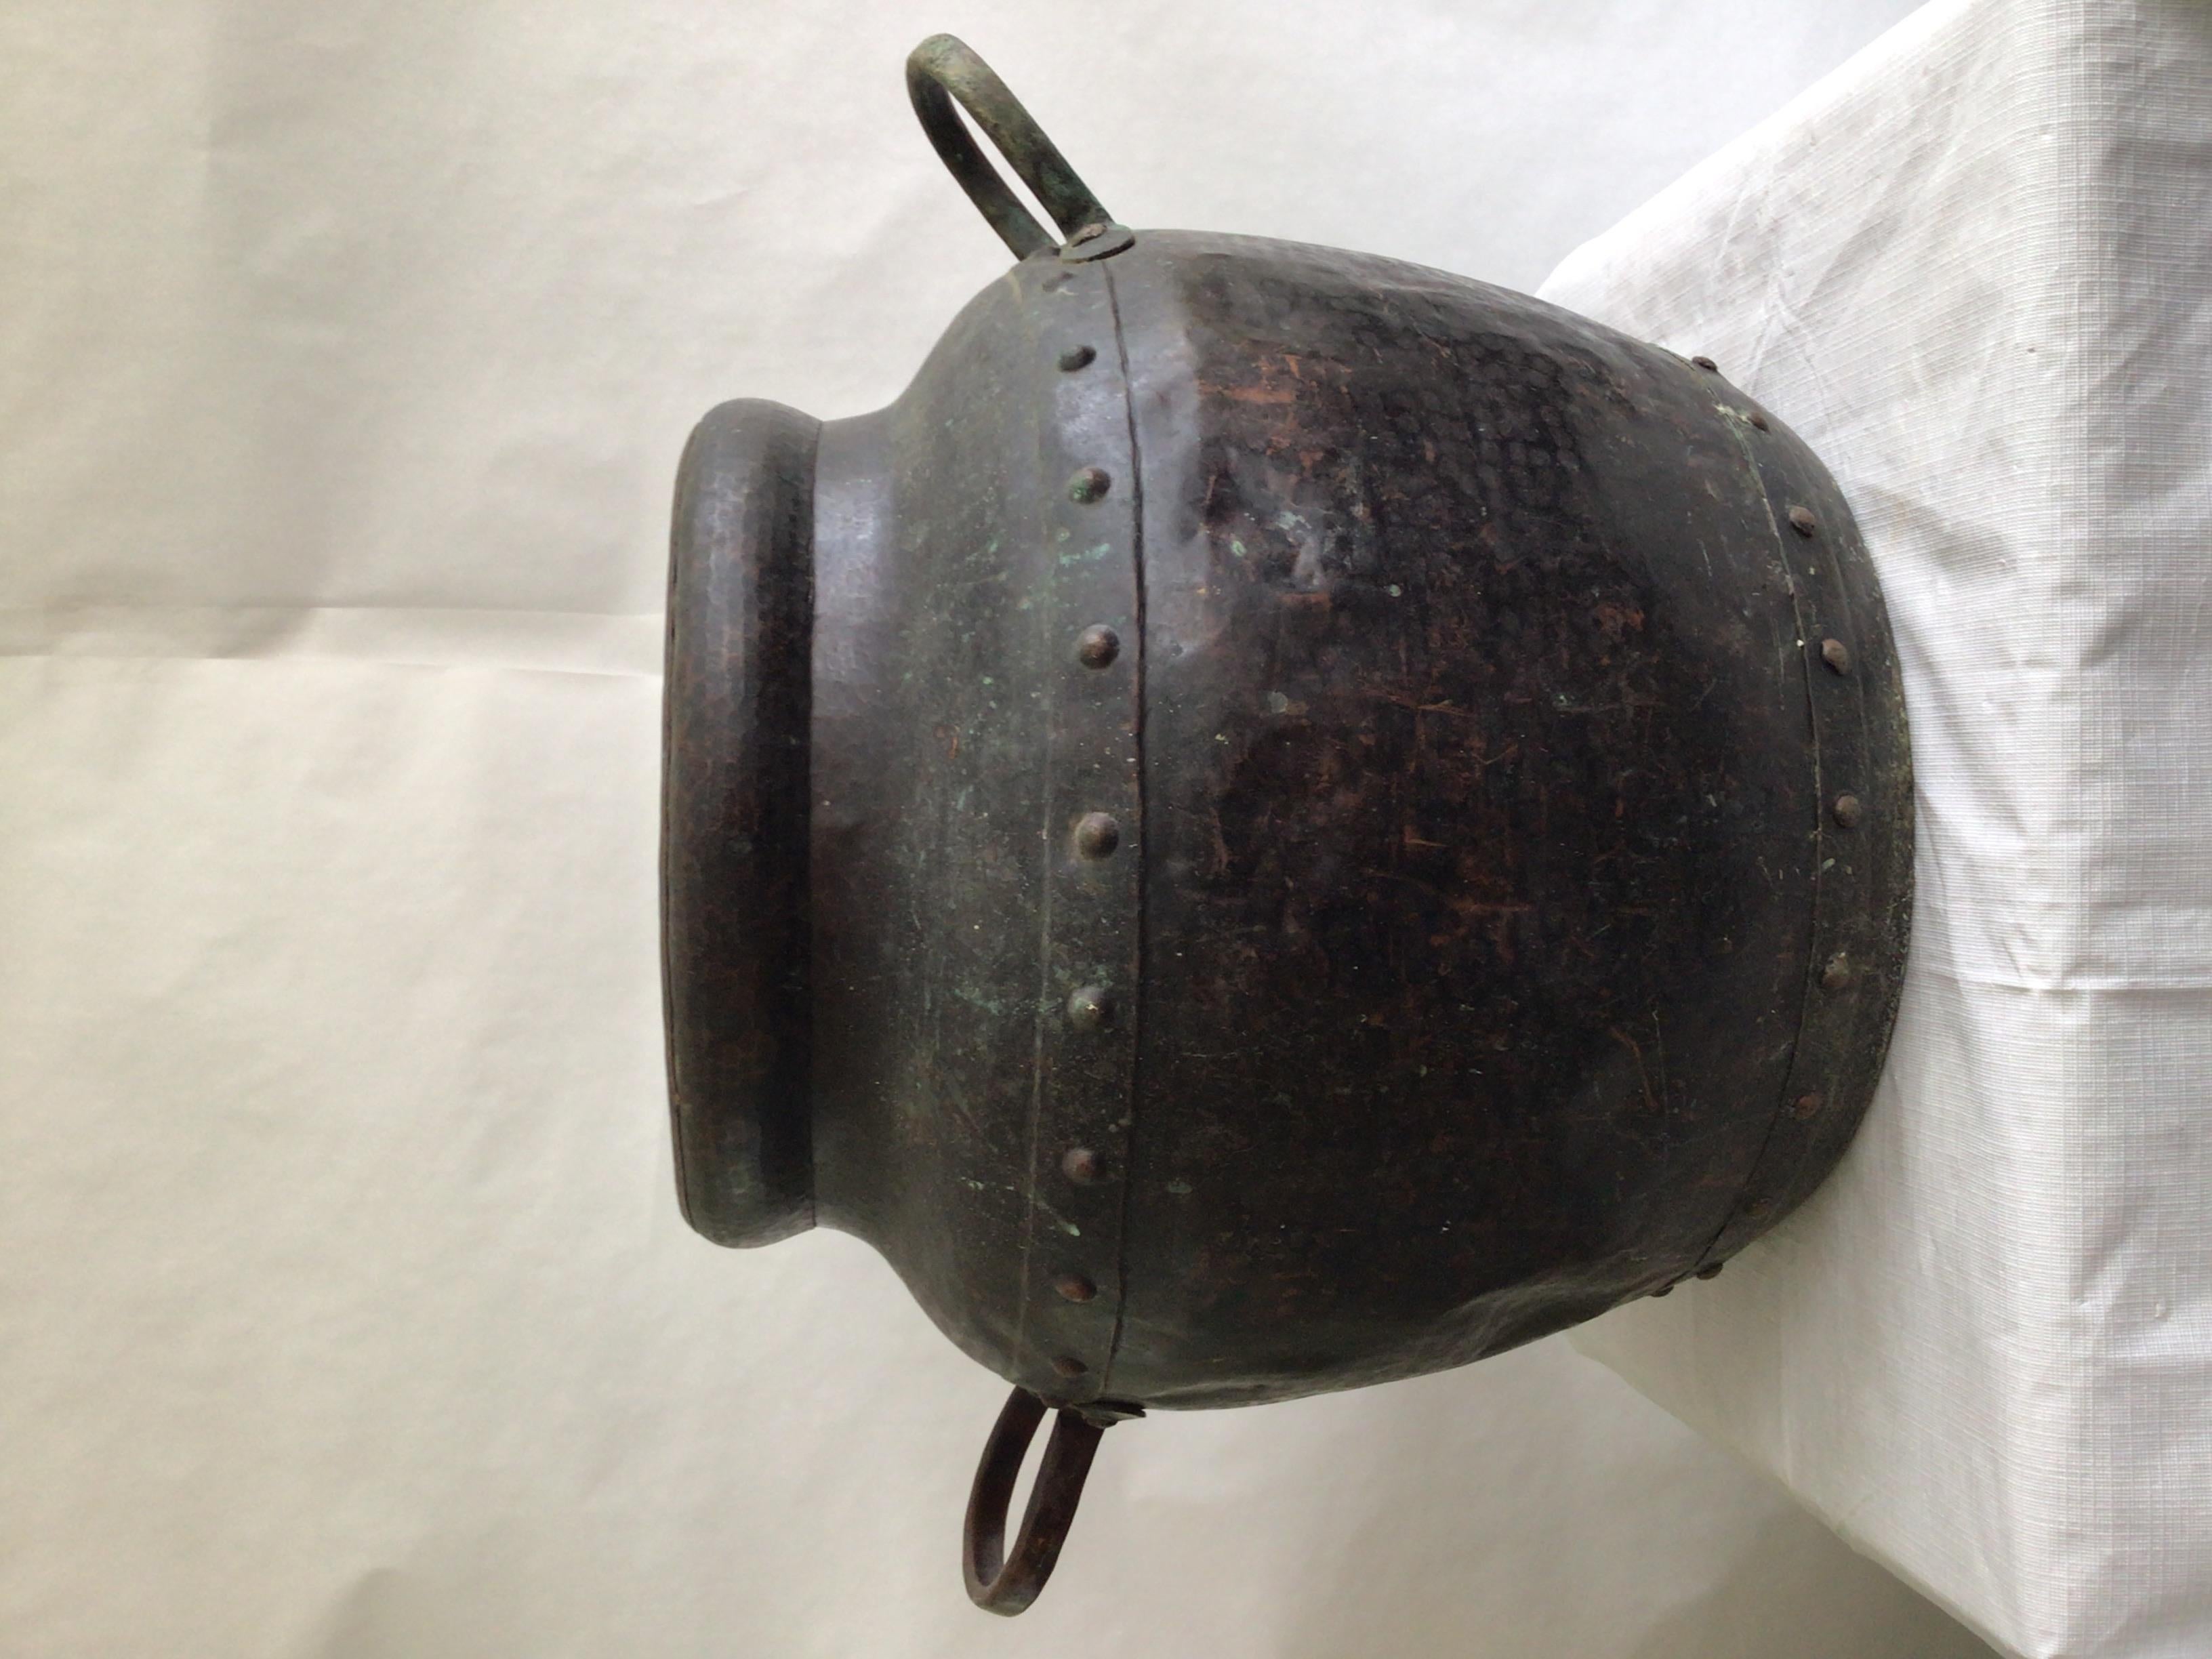 1940s Hand Hammered Studded Copper Pot With Handles
Beautiful patina and hammered finish 